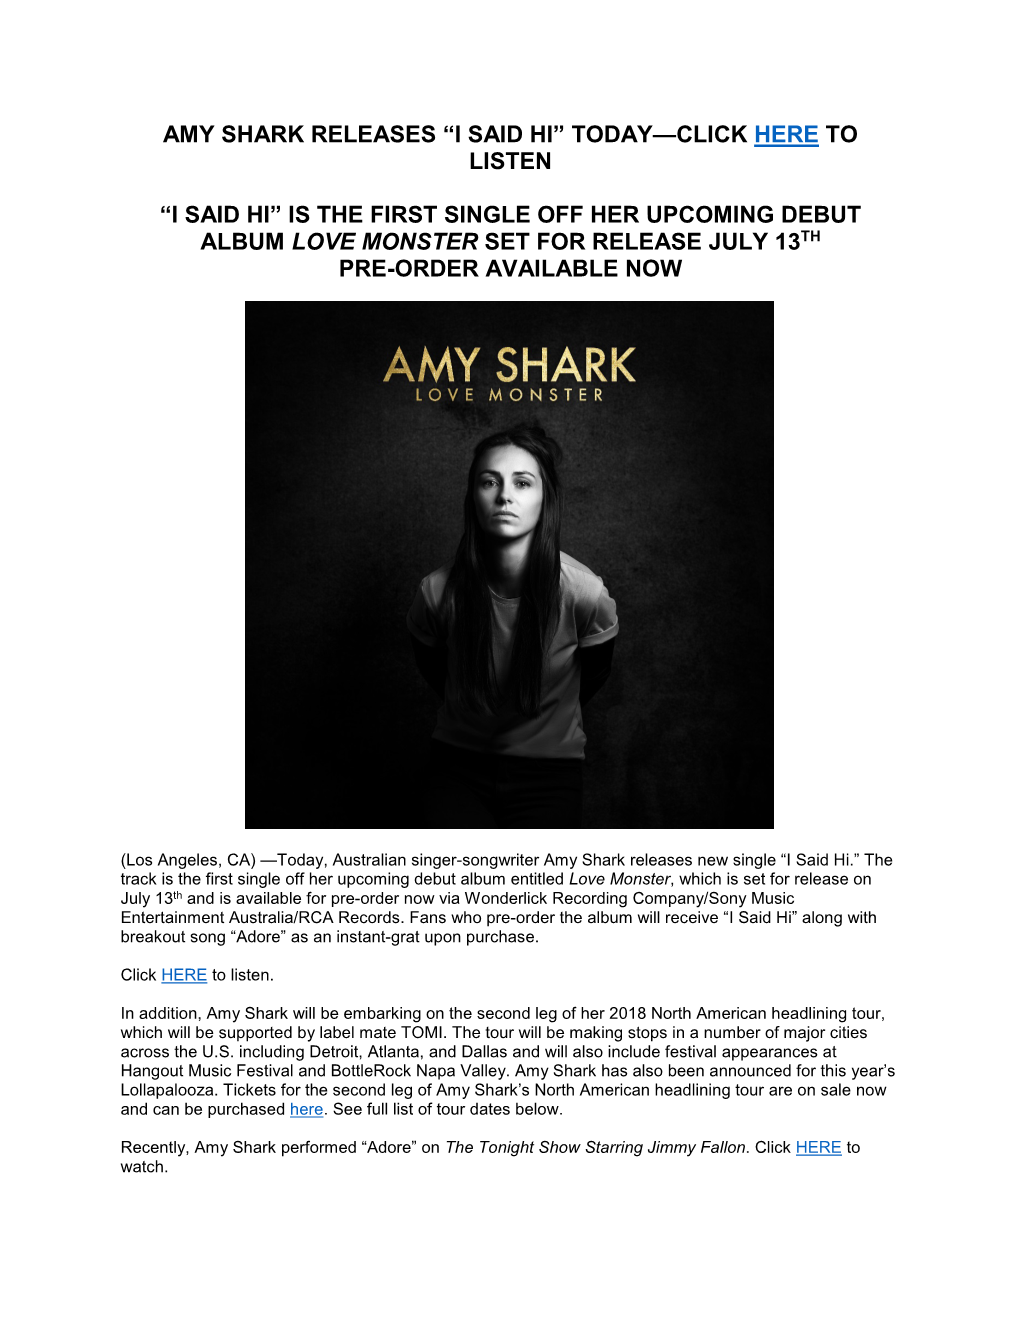 Amy Shark Releases “I Said Hi” Today—Click Here to Listen